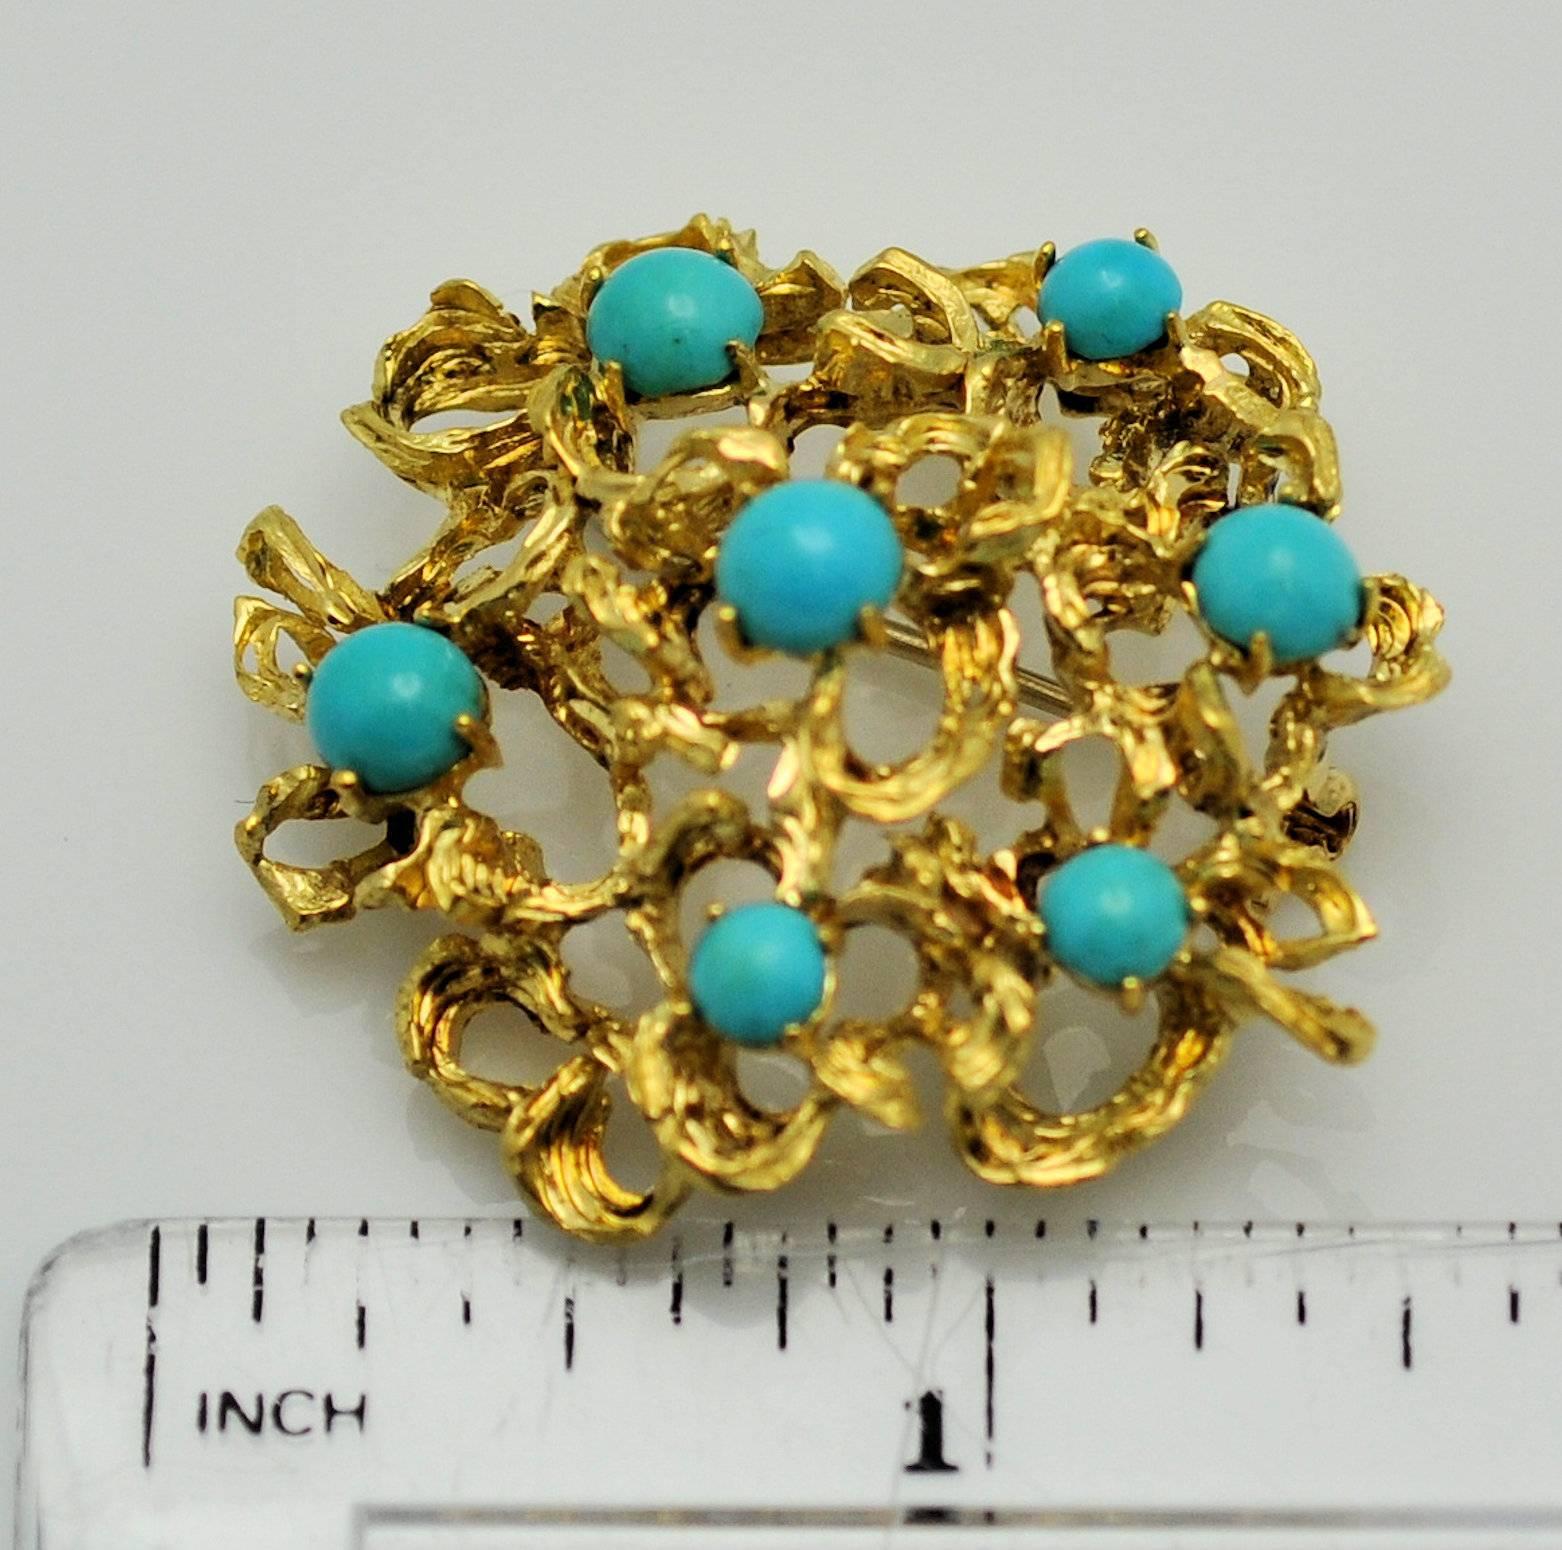 18K yellow gold free form brooch from Italy set with 7 round cabachons of fine turquoise.  Stones measure 4.5 x 5 mm.  Signed:  Italy 18K 